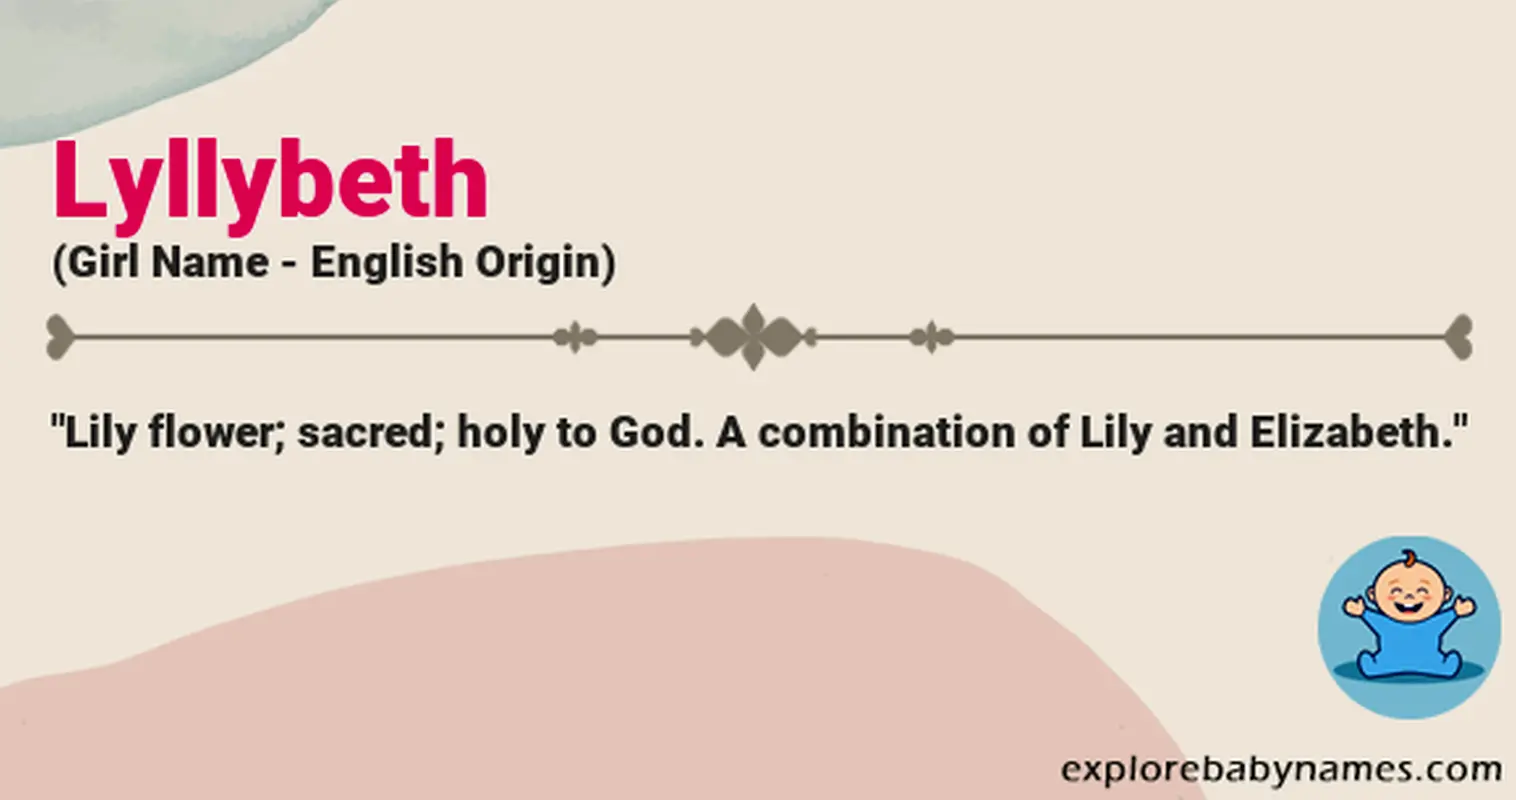 Meaning of Lyllybeth